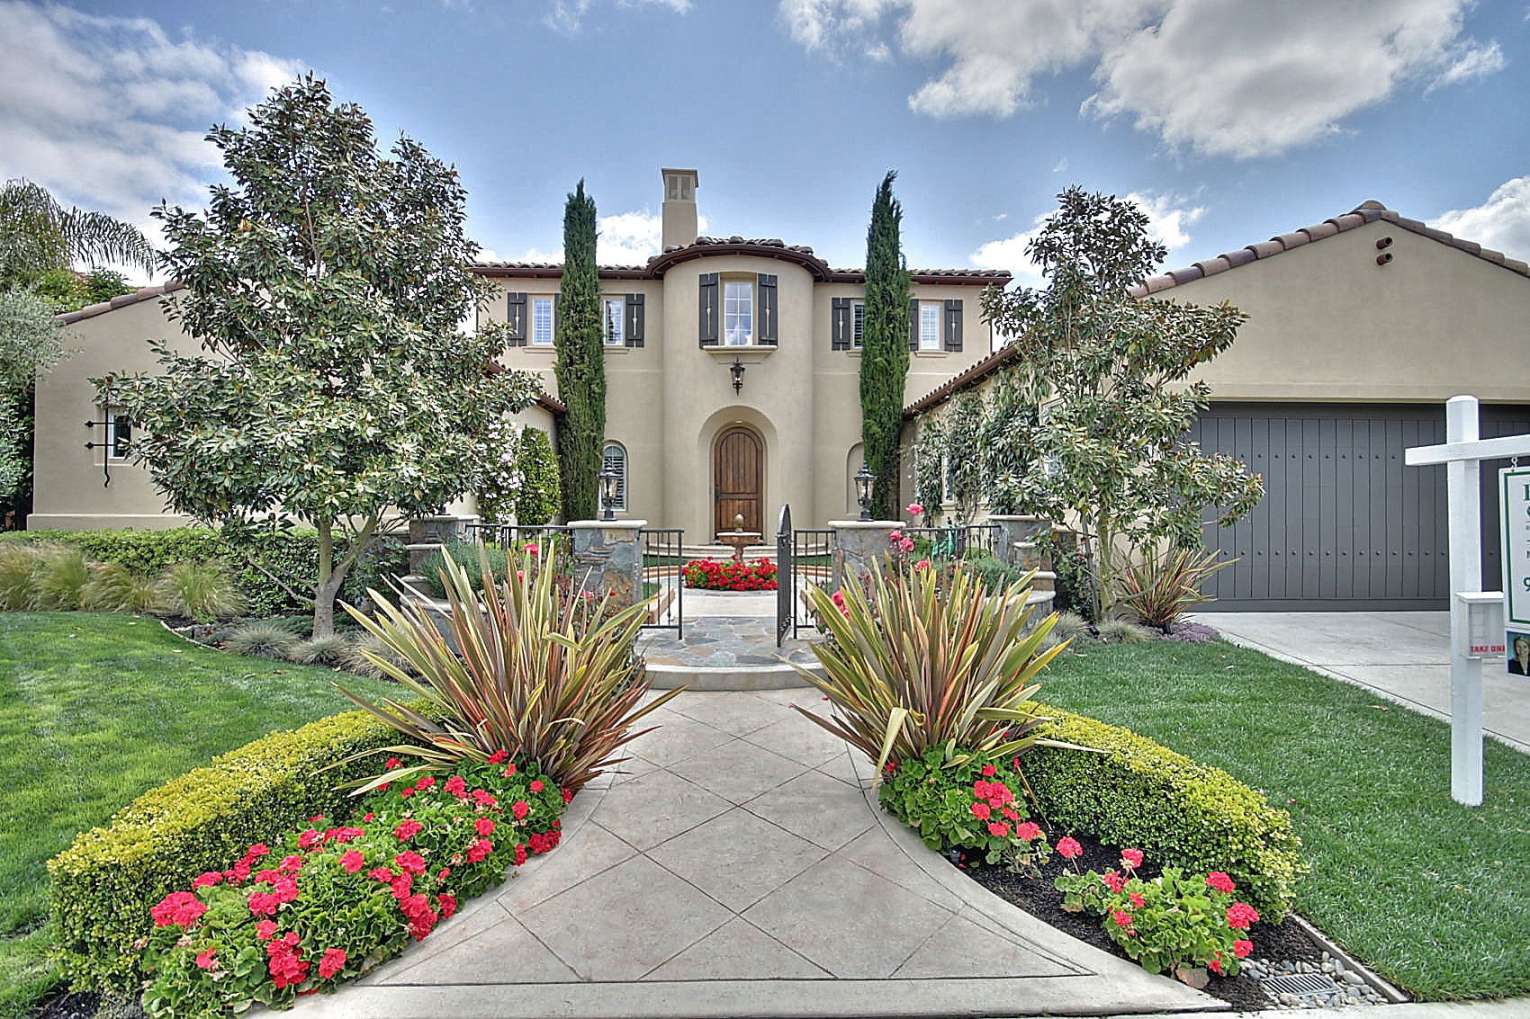 Luxurious home, high end landscape, Italian cypress trees